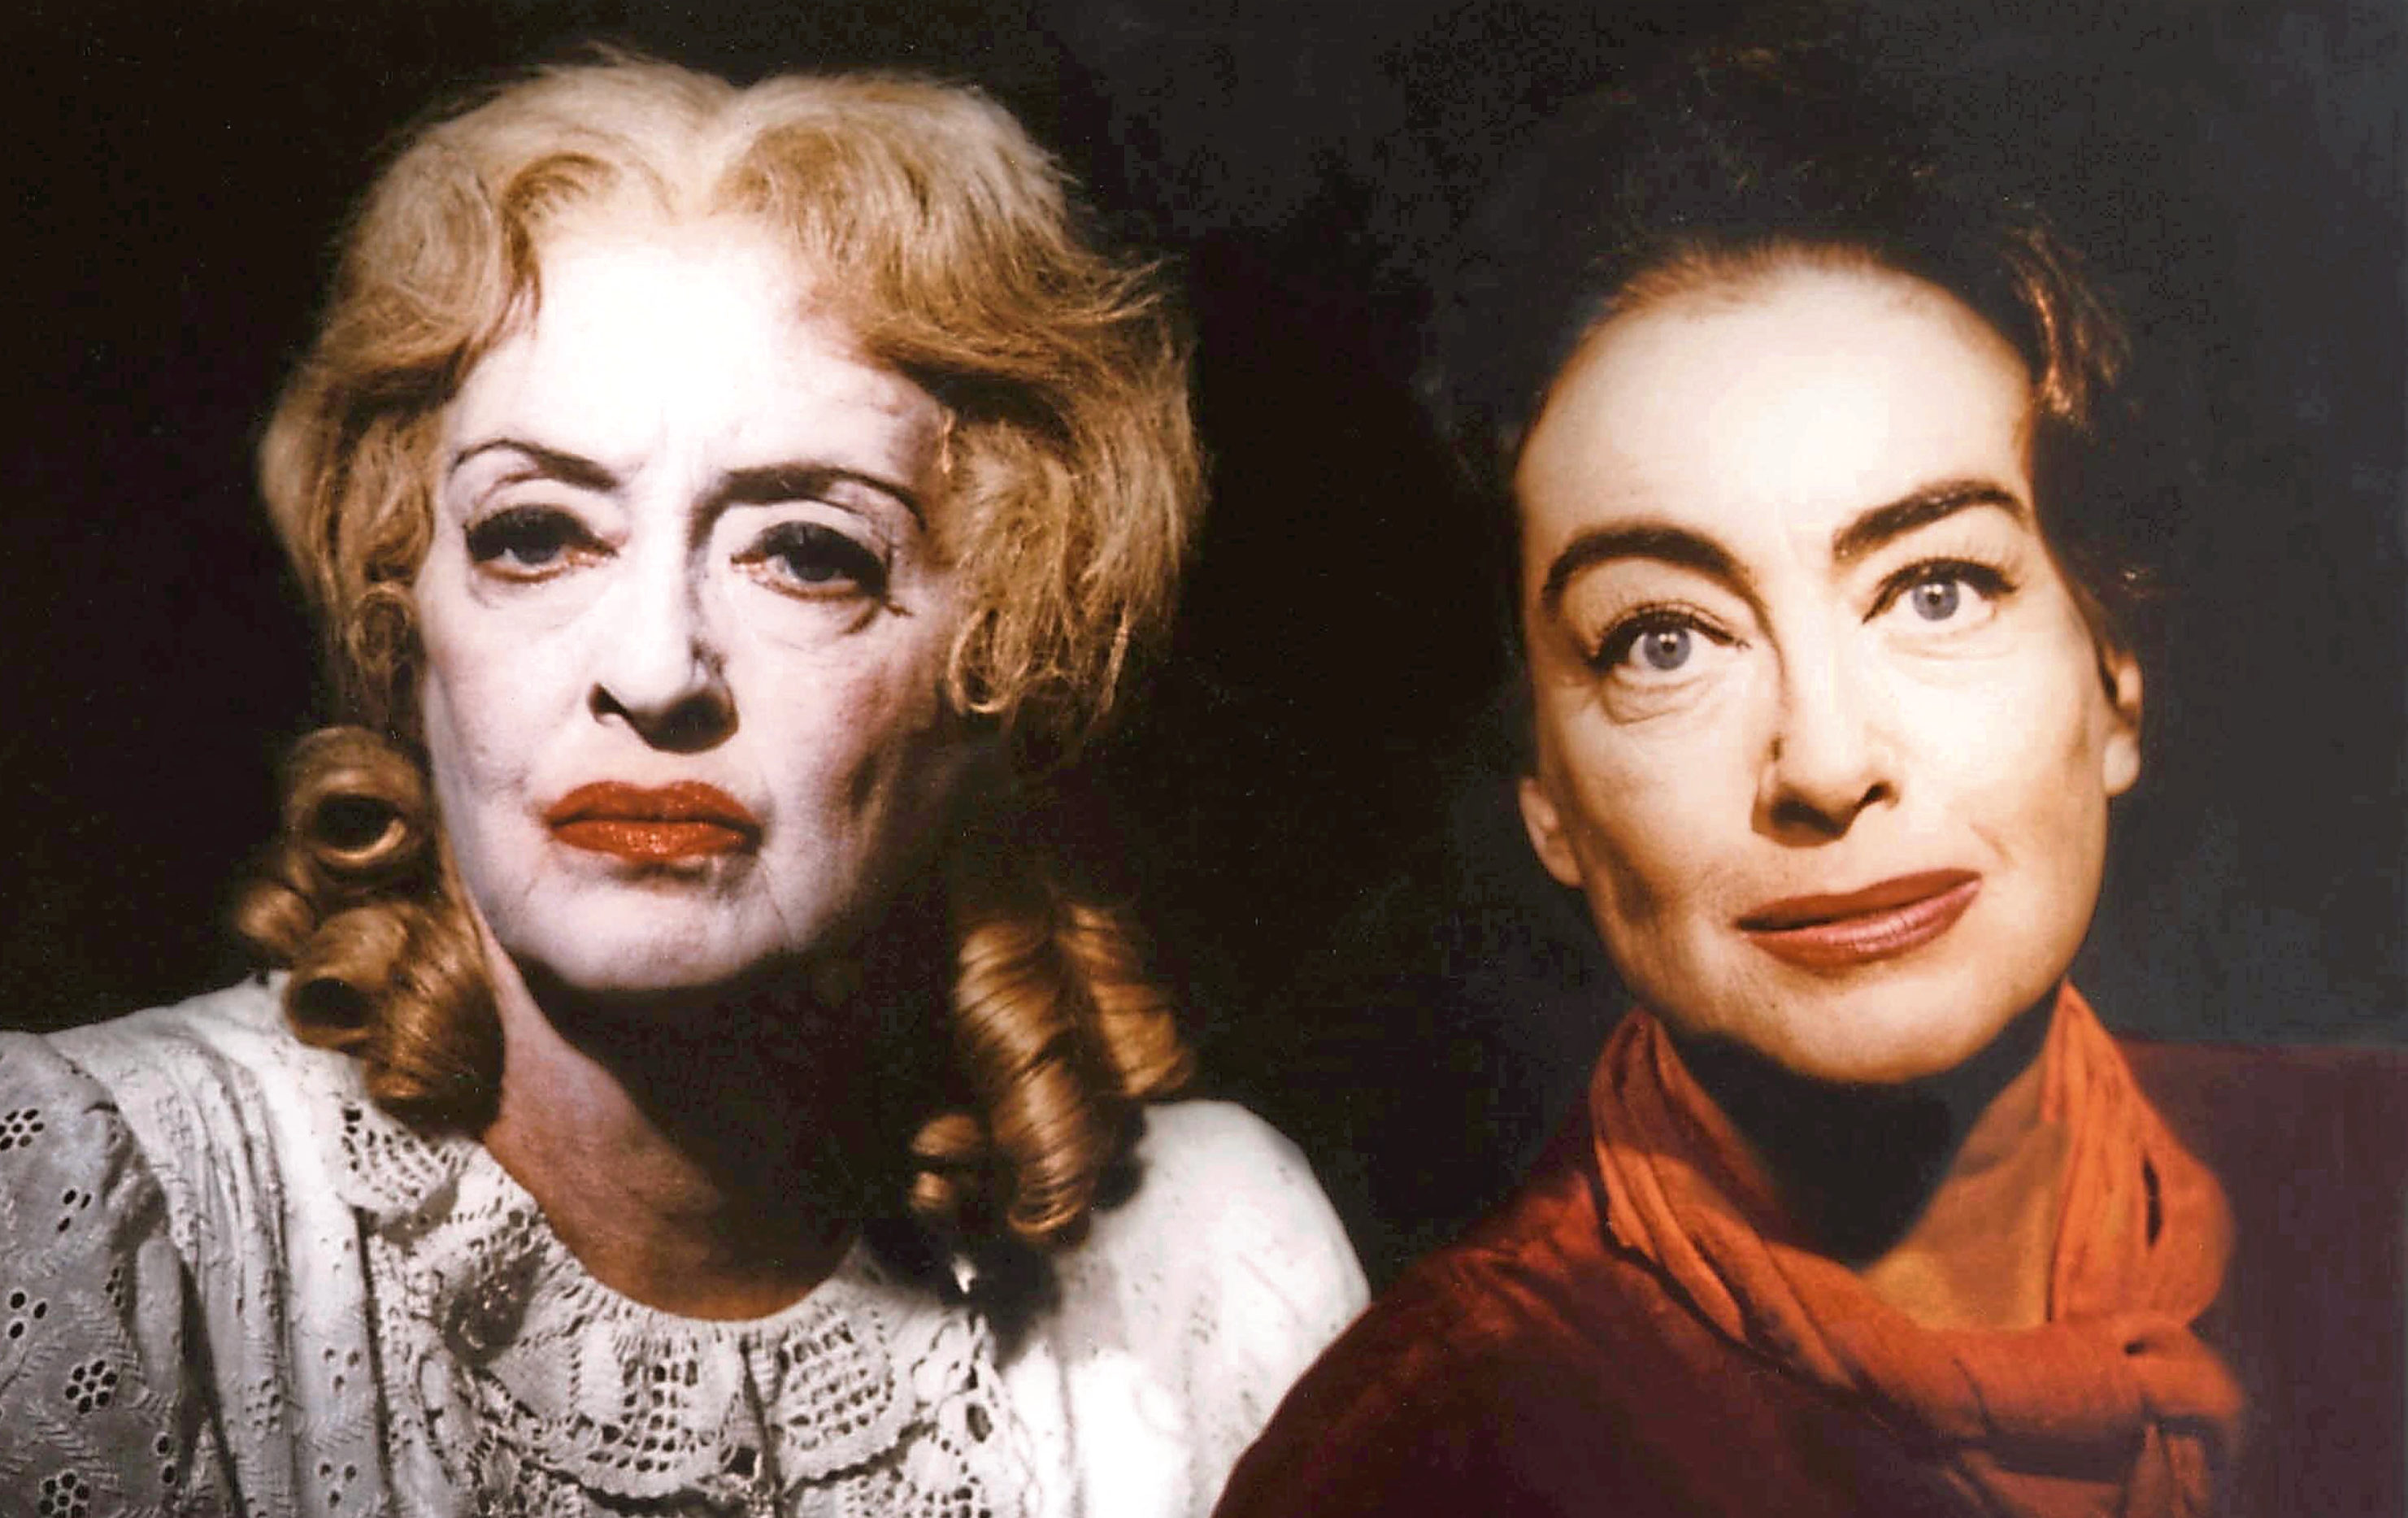 Bette Davis and Joan Crawford in 1962 film What Ever Happened To Baby Jane?